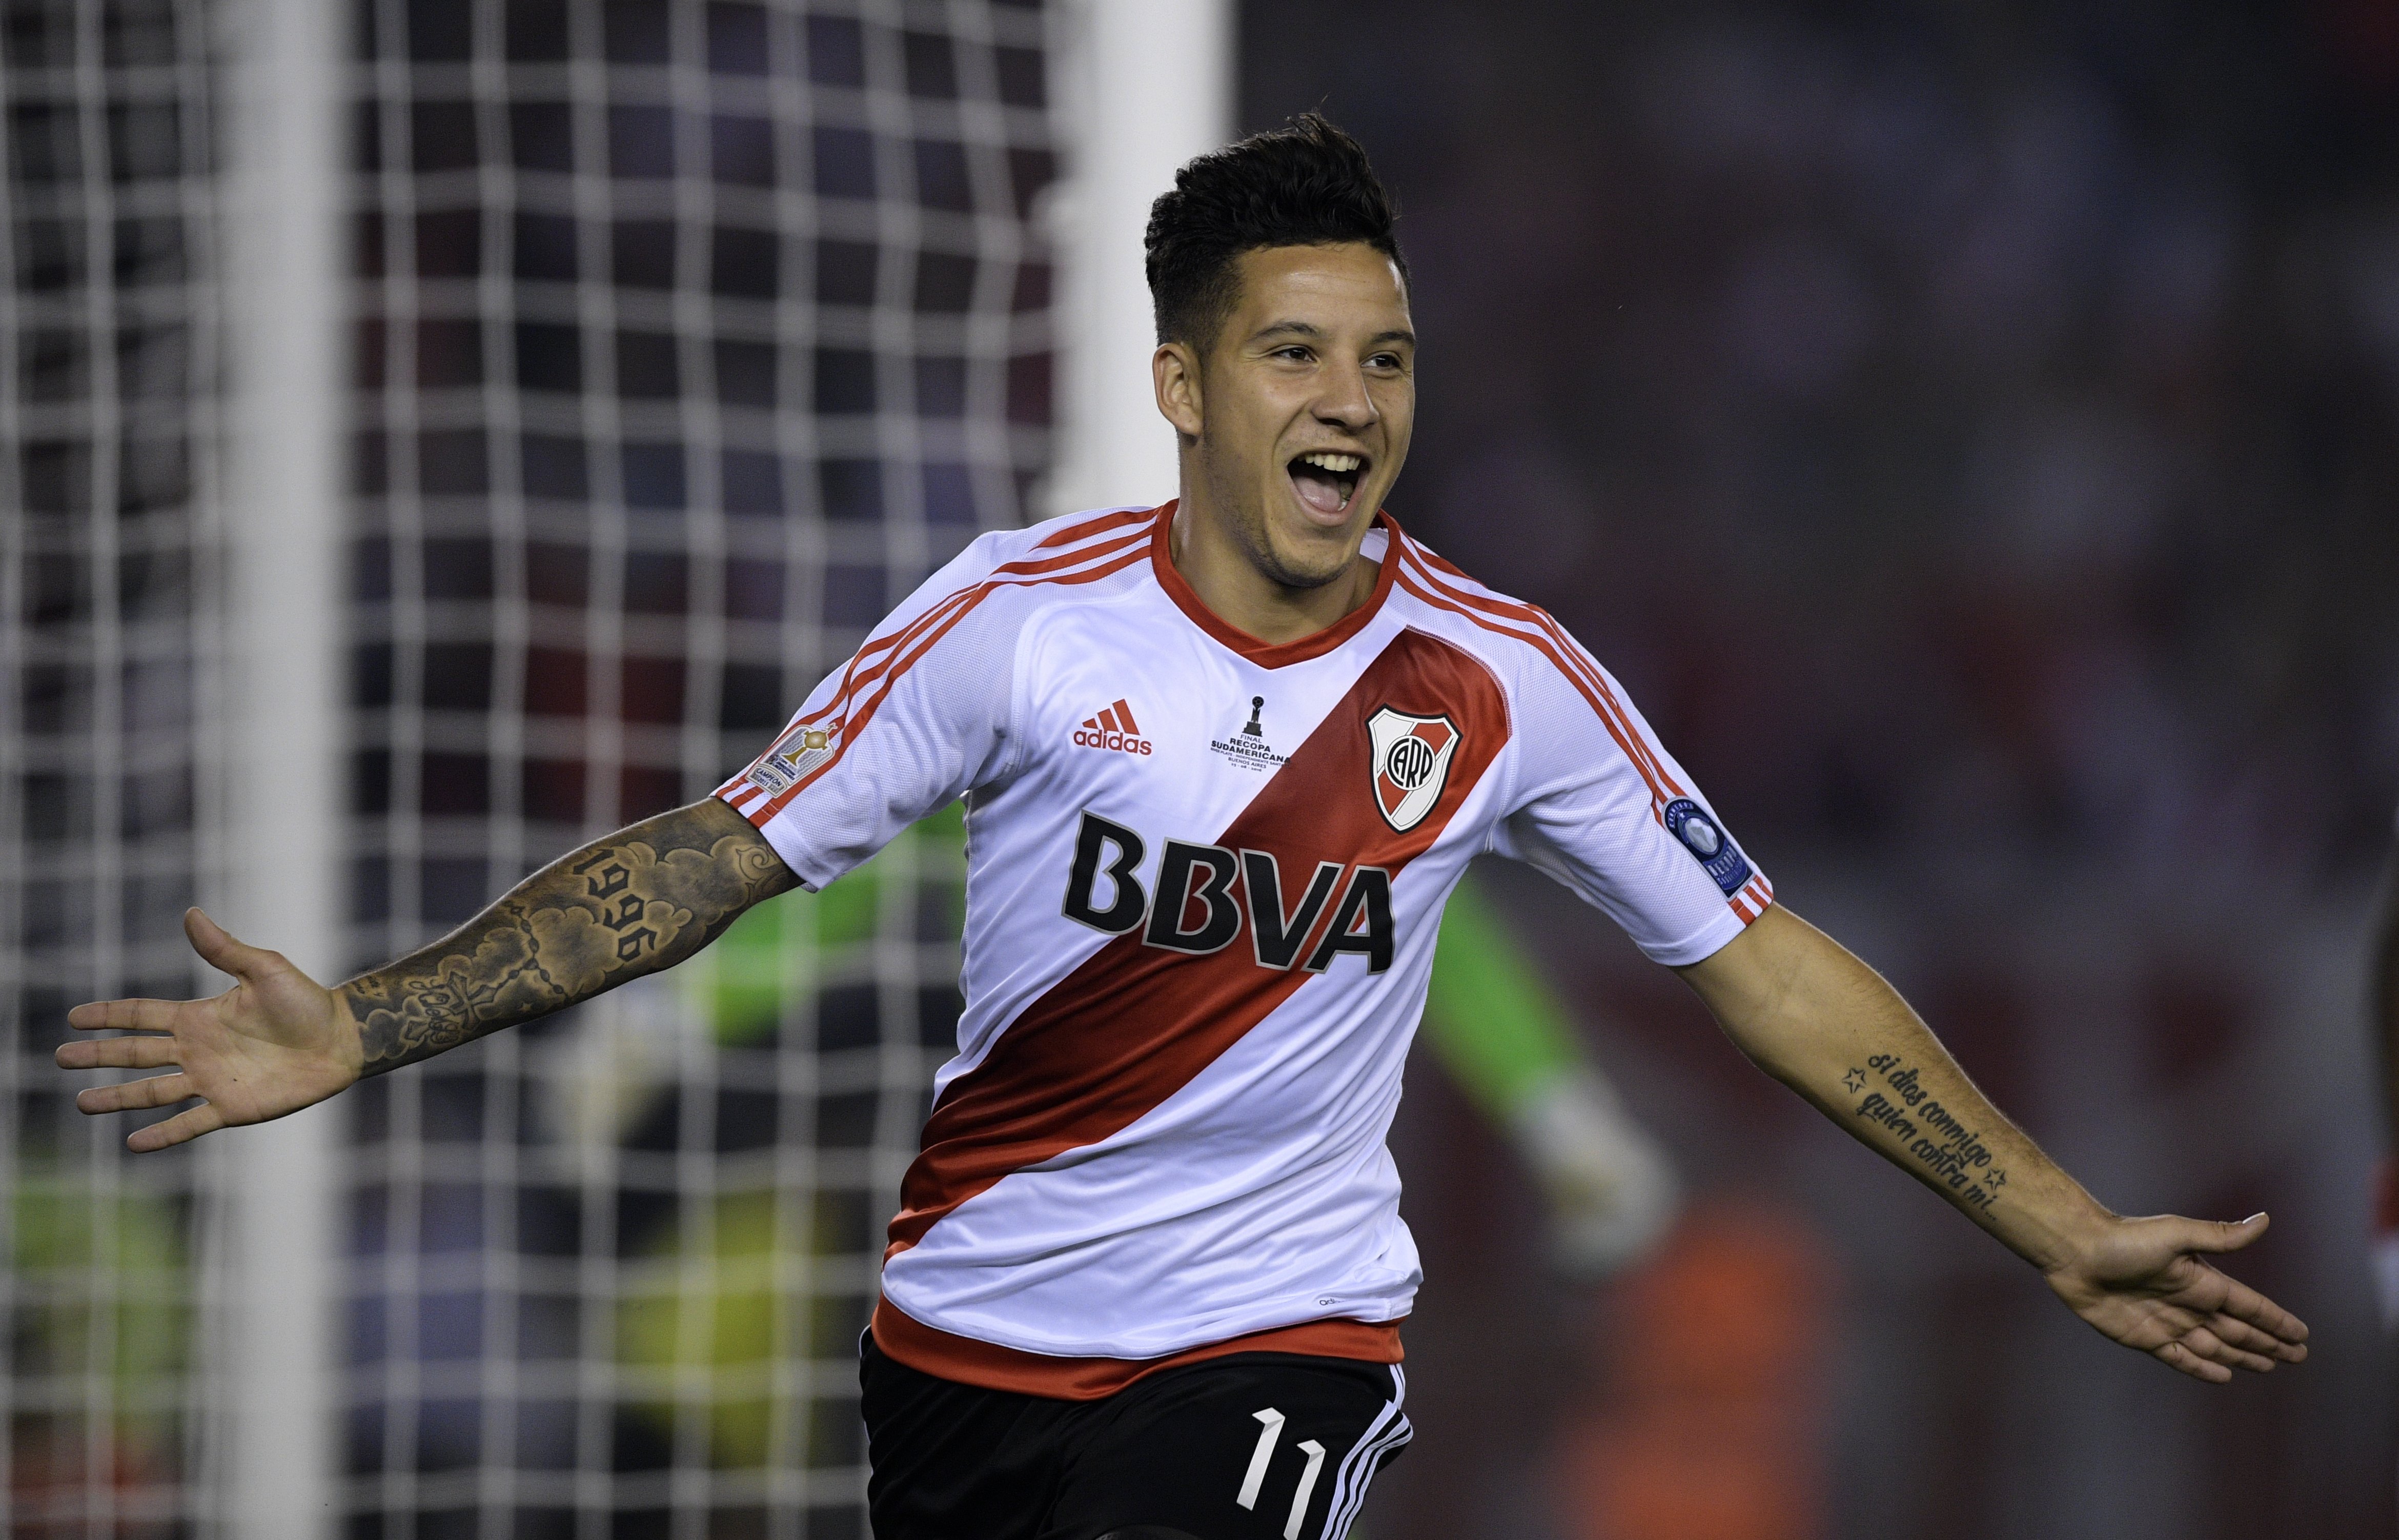 Marianella to Sky: “River Plate is a team that sells, Driussi is the next Gabigol.”